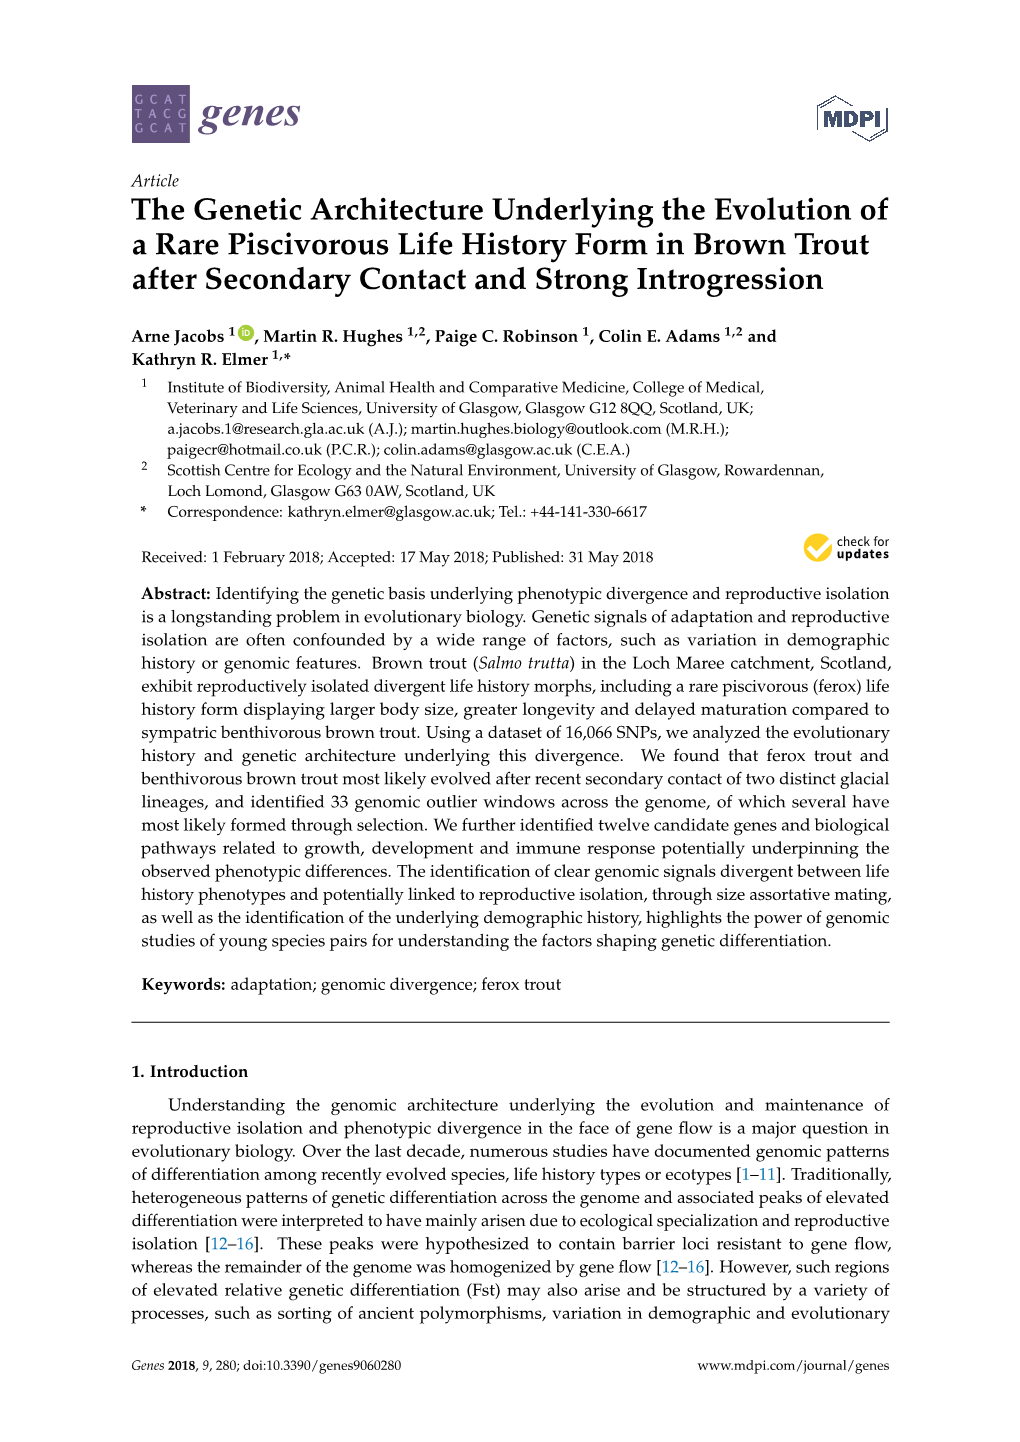 The Genetic Architecture Underlying the Evolution of a Rare Piscivorous Life History Form in Brown Trout After Secondary Contact and Strong Introgression